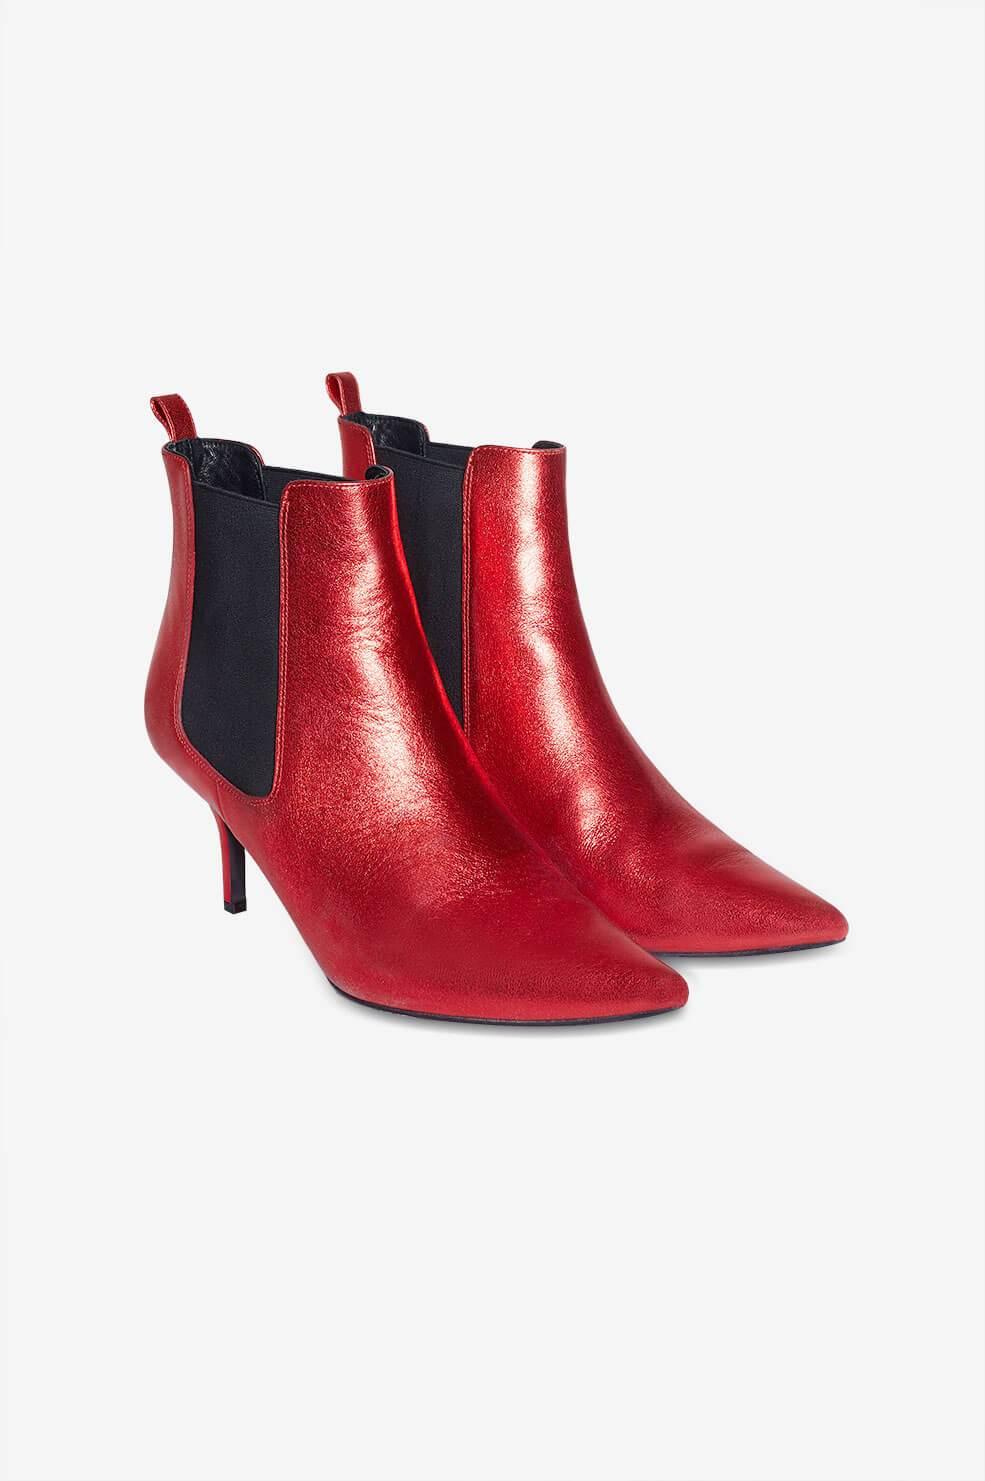 Anine Bing Stevie Leather Boots in Red Metallic (Red) - Lyst